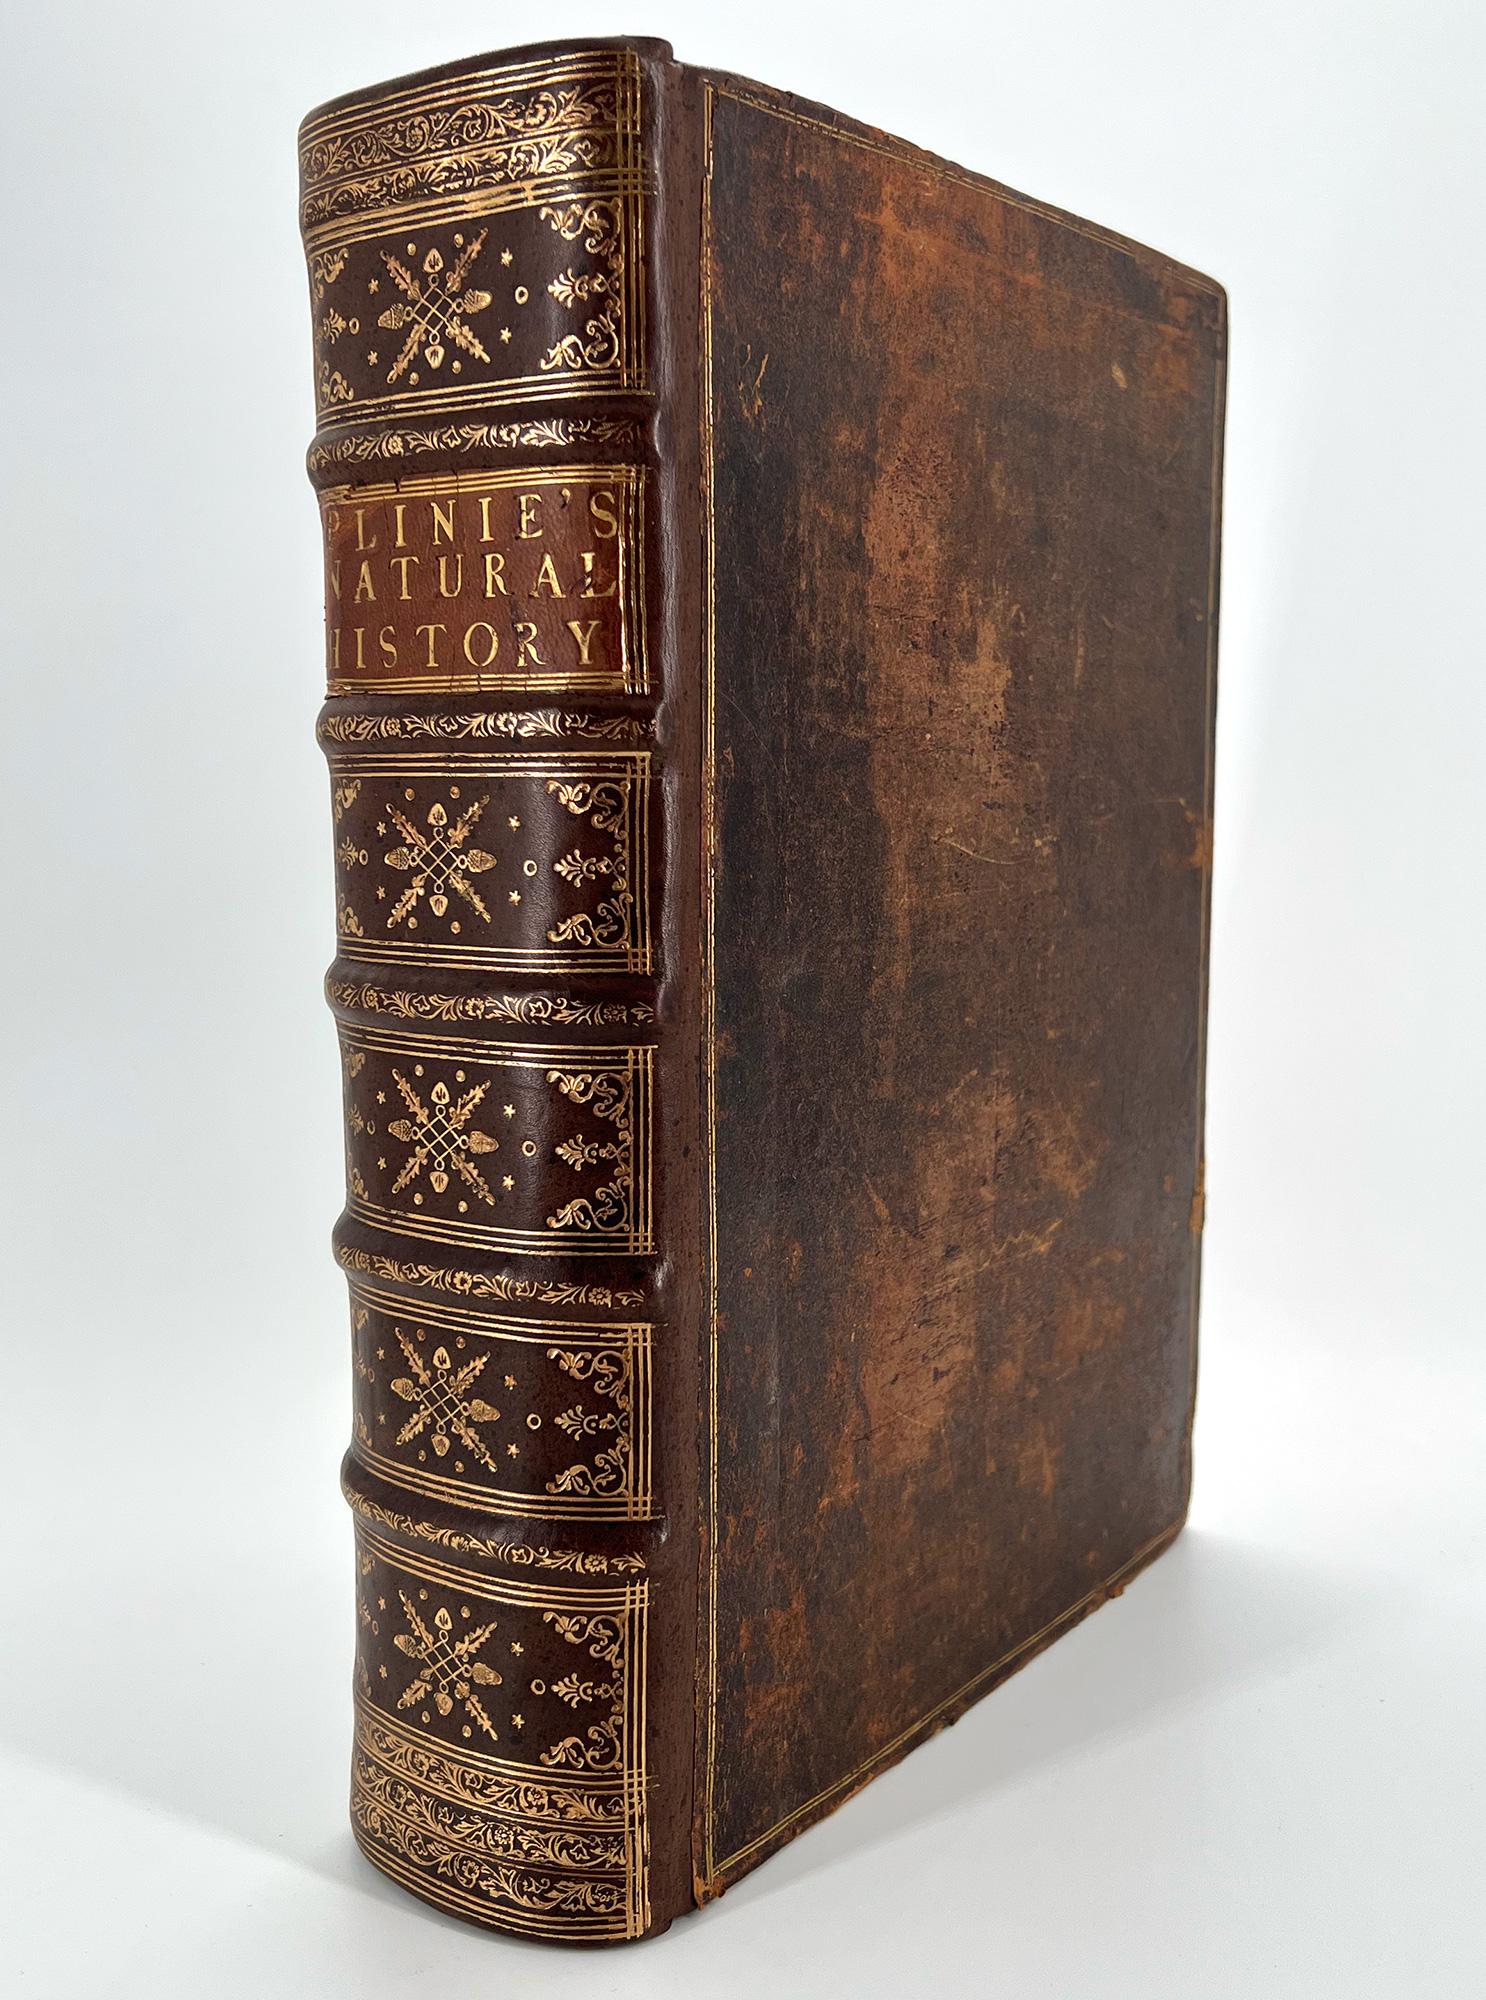 A rare and complete first English edition of this seminal work.

Pliny, Gaius Secundus / Plinius, Gaius Secundus (23­-79 AD) / Translated by Philemon Holland.
The Historie of the World |Commonly called, | THE NATURALL HISTORIE OF I C.PLINIUS